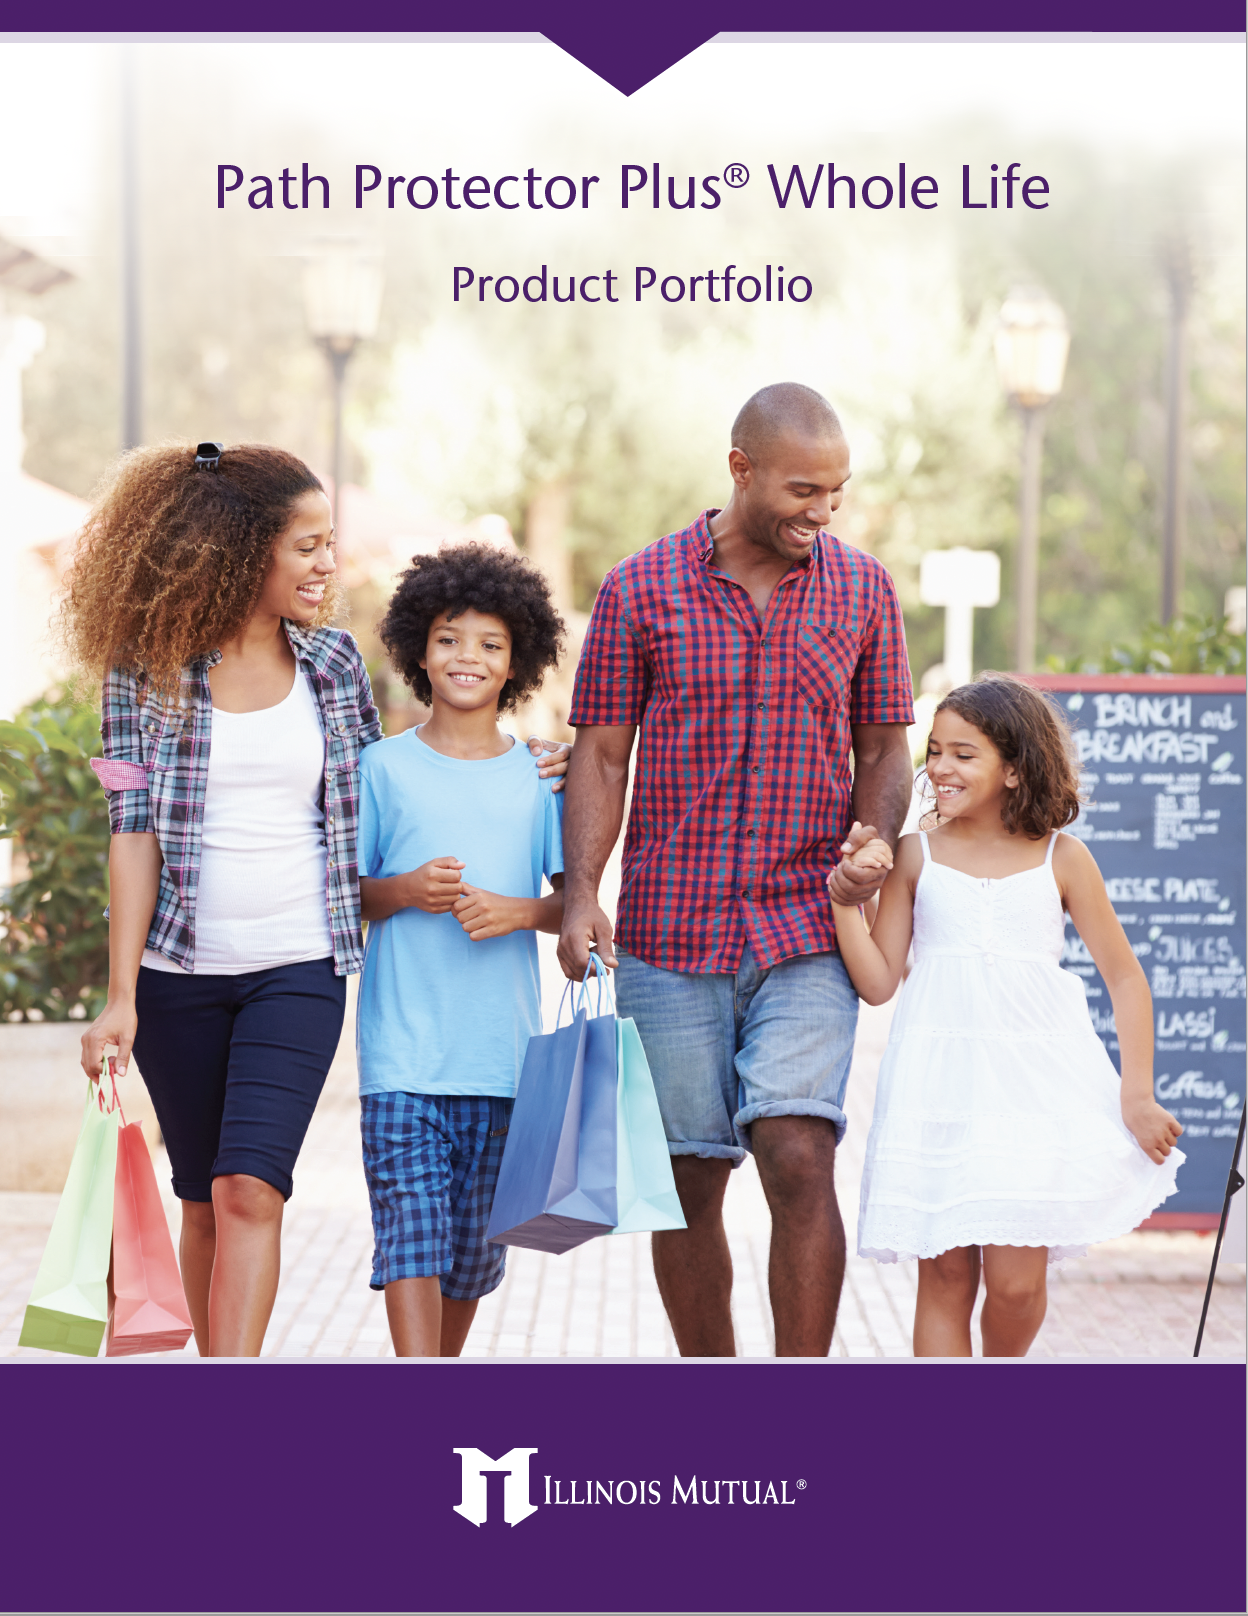 Path Protector Plus Whole Life Guide